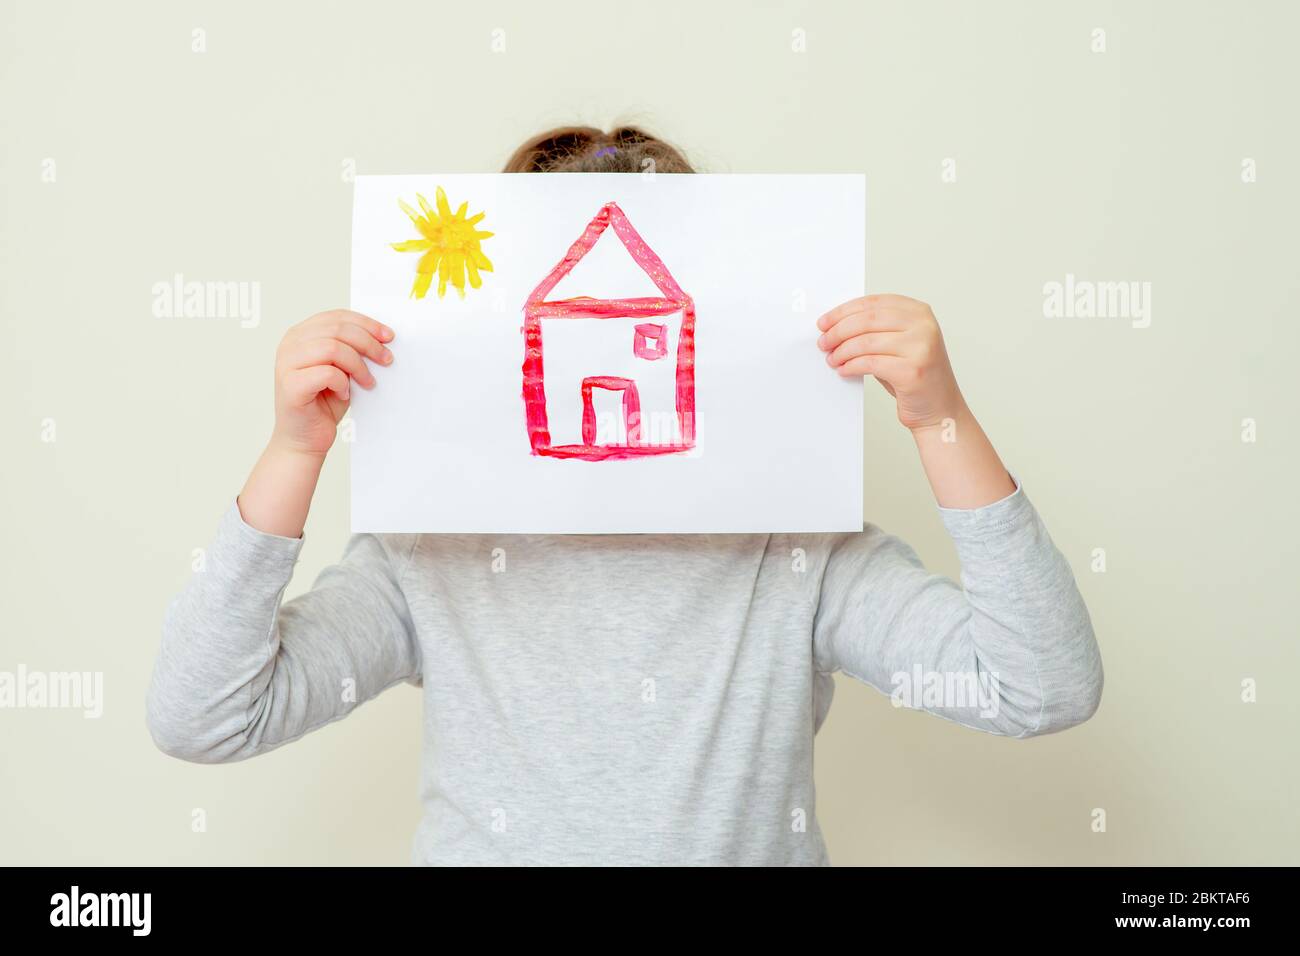 Child is holding picture of house covering her face on yellow background. Children's creativity. Stock Photo